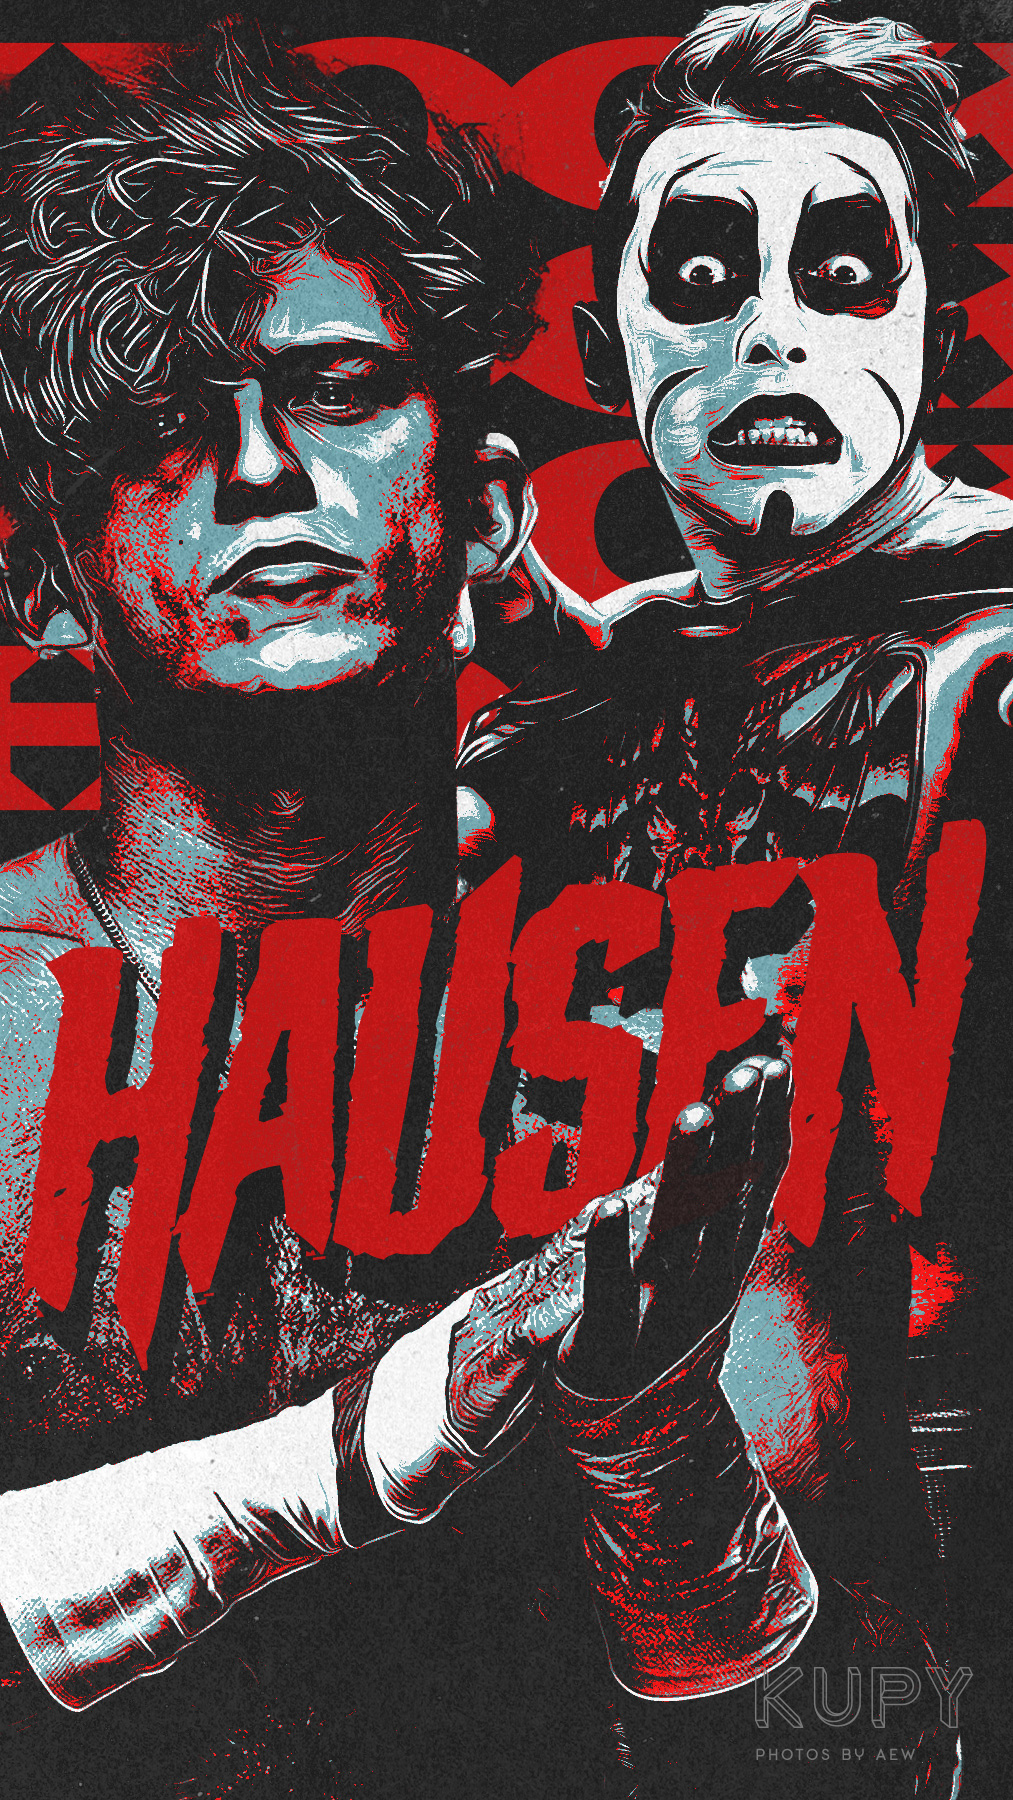 HOOKHAUSEN poster and mobile wallpaper! - Kupy Wrestling Wallpapers